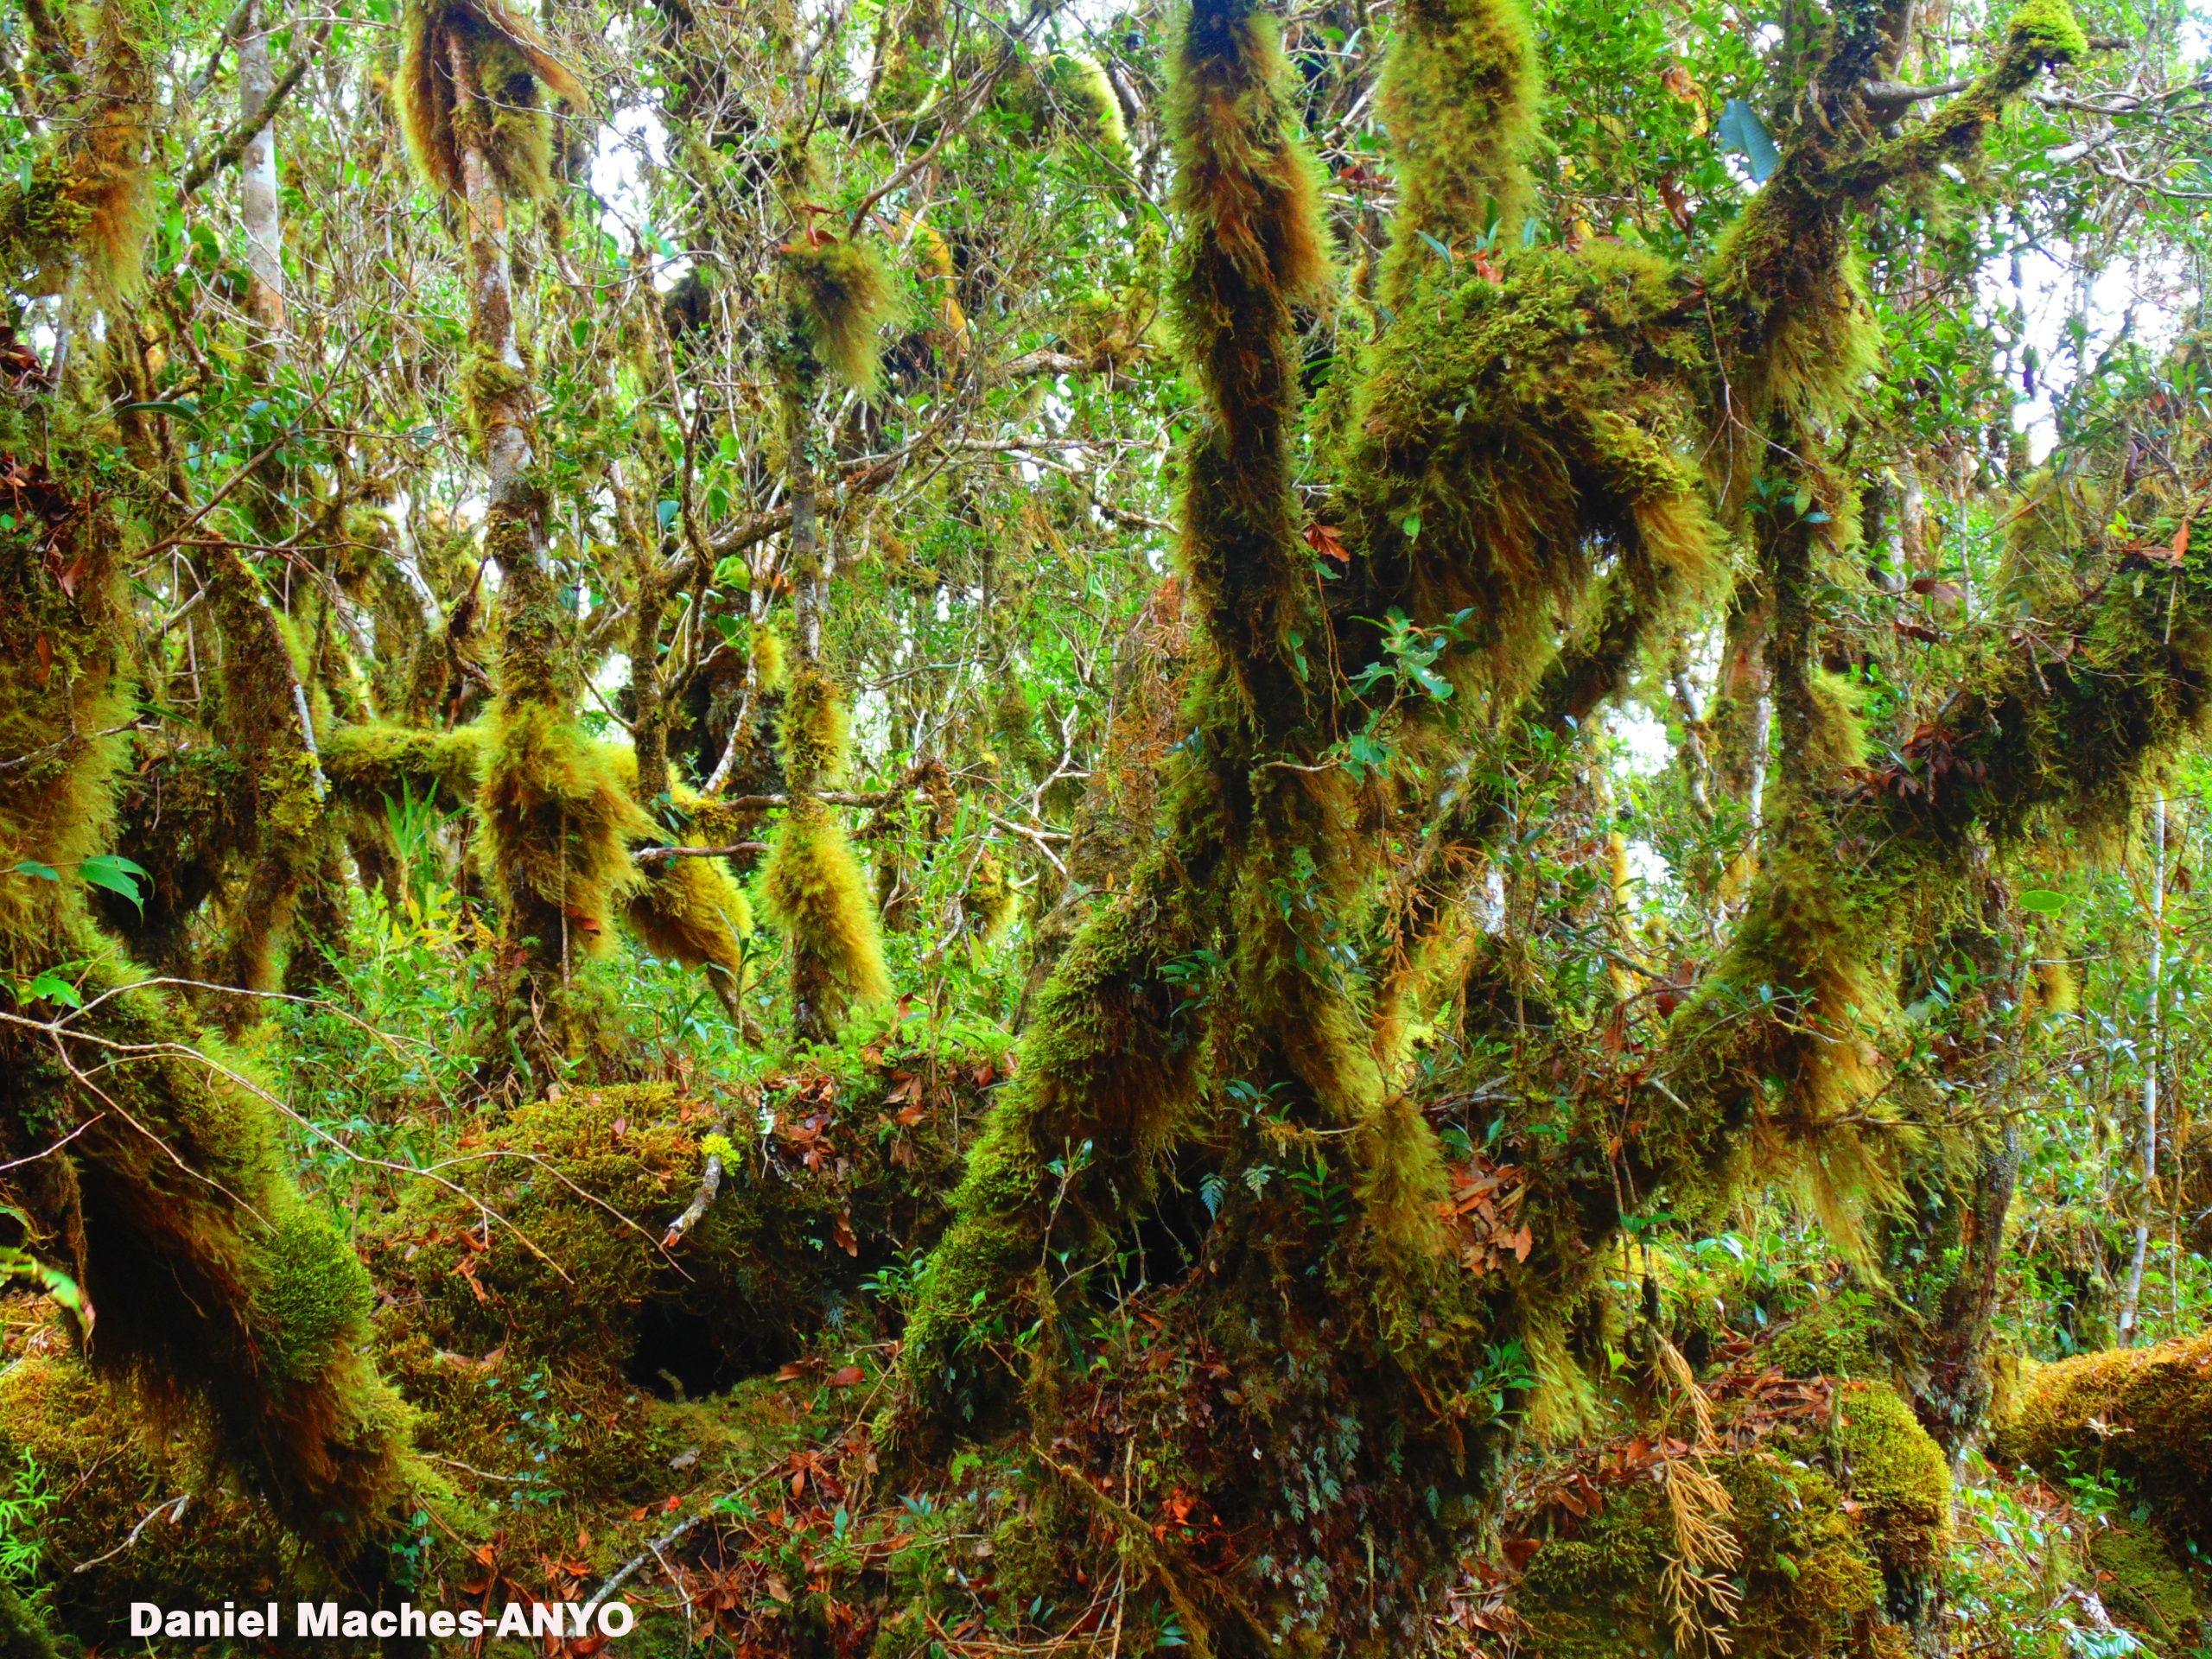 Sayang Mossy Forest (Philippines' Last Ecological Frontier)